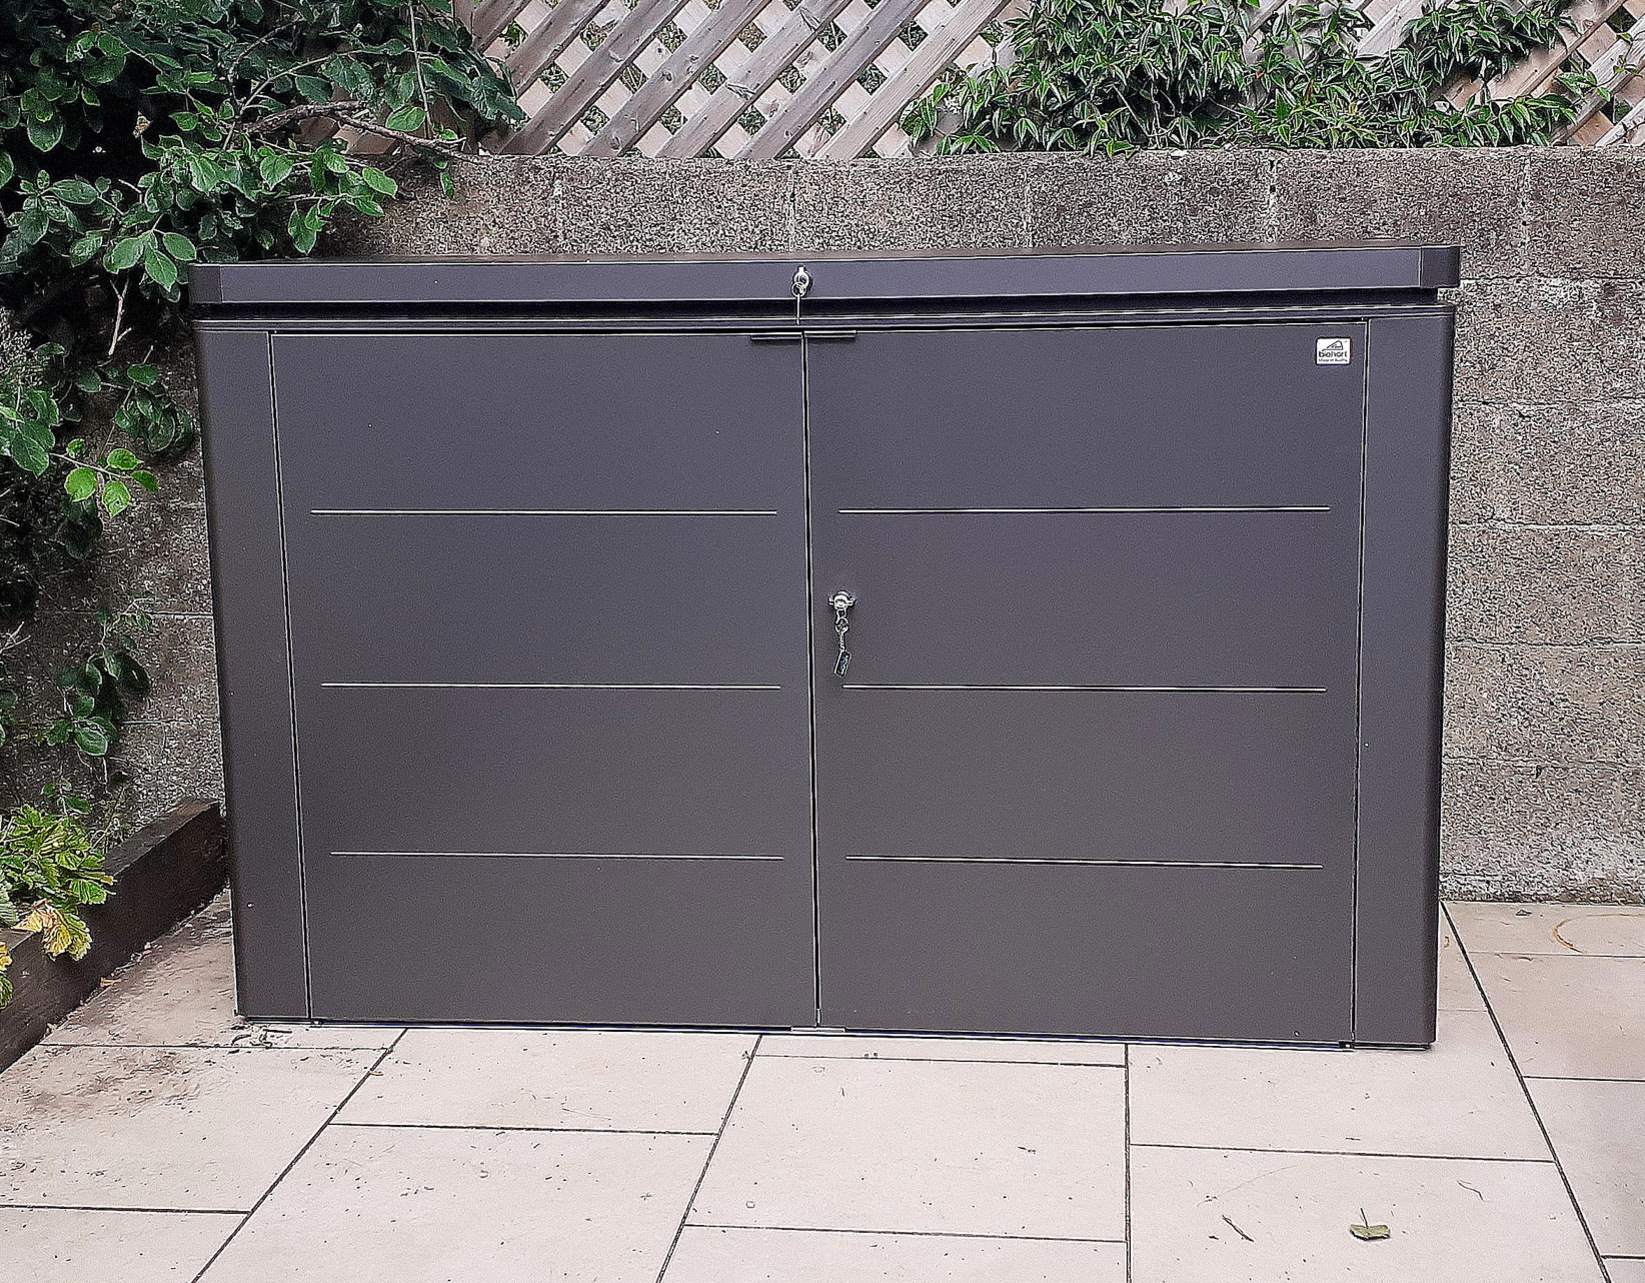 The Biohort HighBoard 200 in metallic dark grey, a secure & weather proof storage solution for the garden area | Supplied & Fitted in Blackrock, Co Dublin